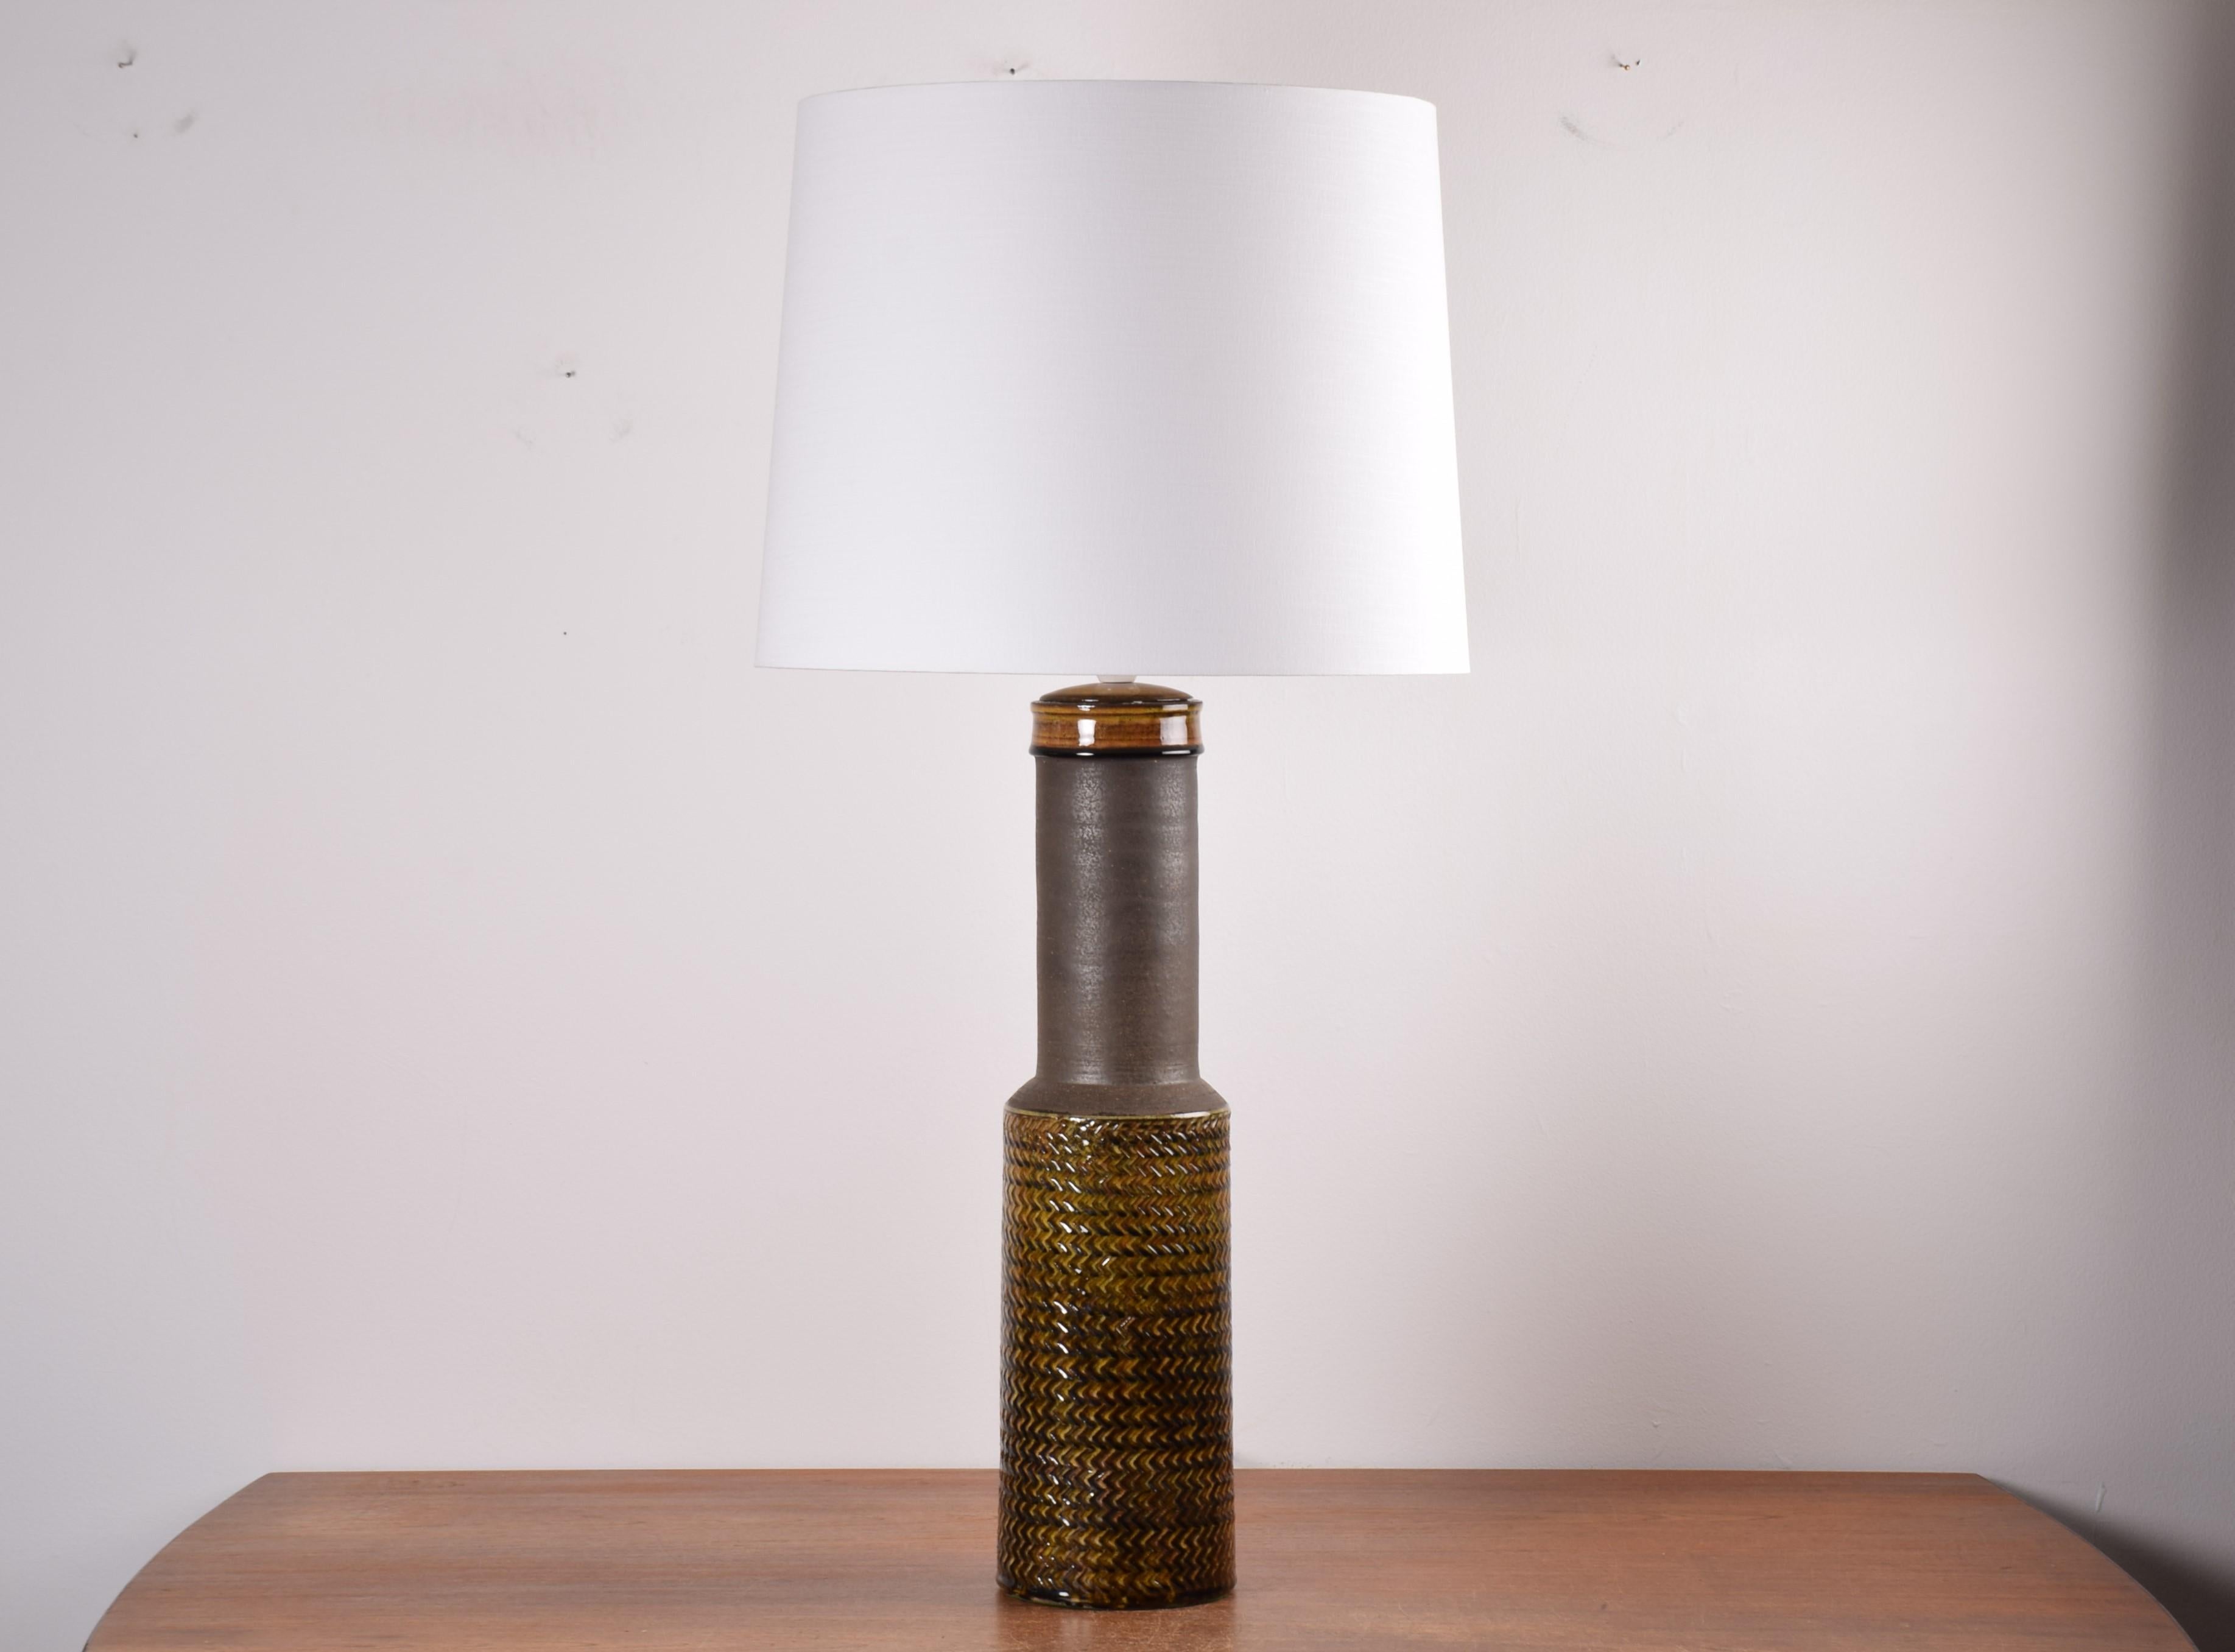 Huge table lamp - or floor lamp if you like - by Nils Kähler for Danish ceramic studio Kähler (HAK). Made circa 1960s.
The lamp shade is included.

The lamp has an unglazed long neck which is very smooth. The top and body have yellow / amber